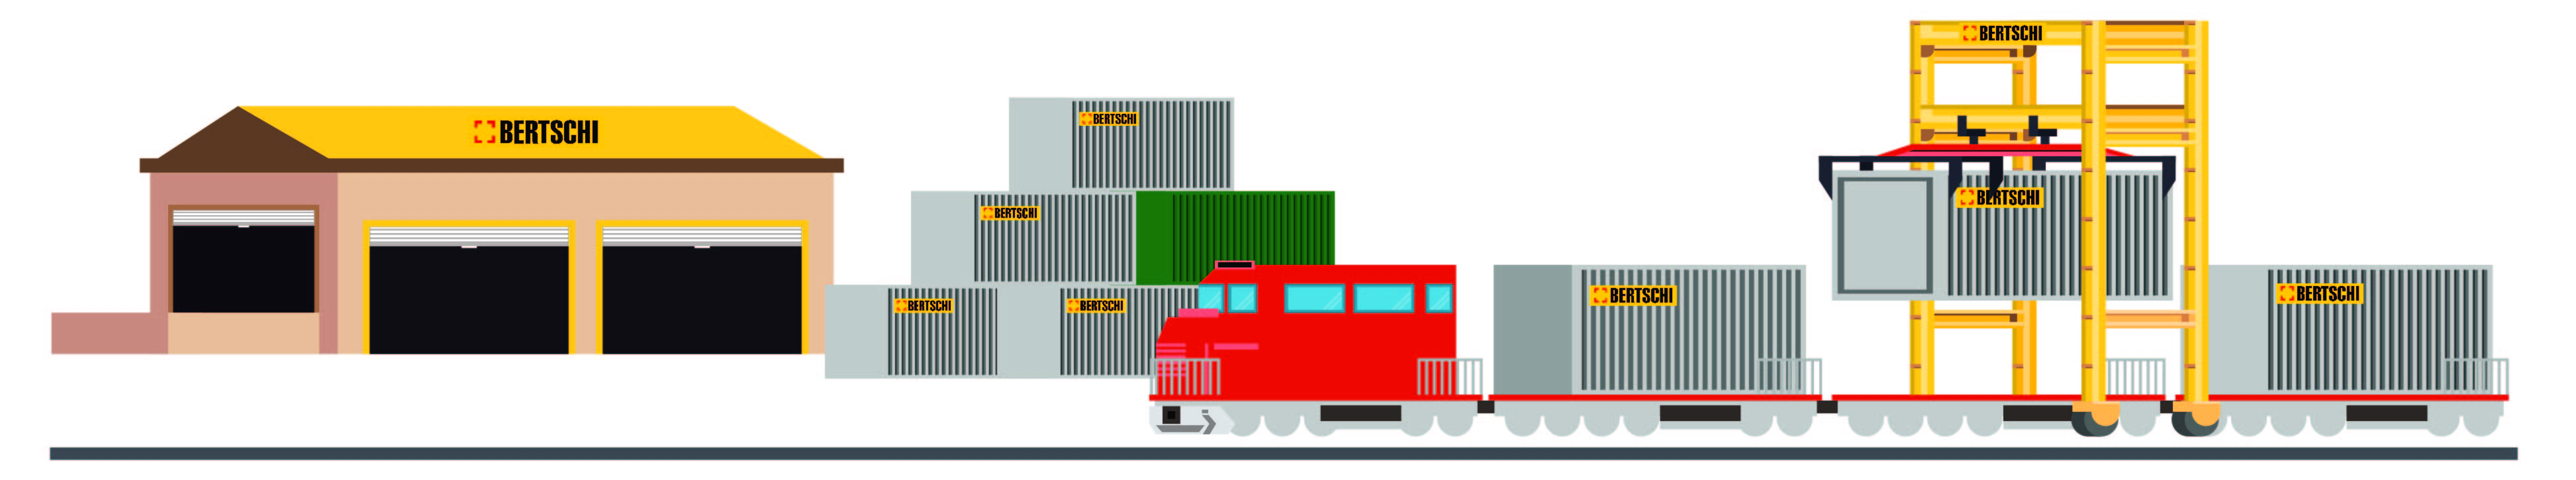 Graphic of a Bertschi terminal with a train and bertschi containers, and a workshop